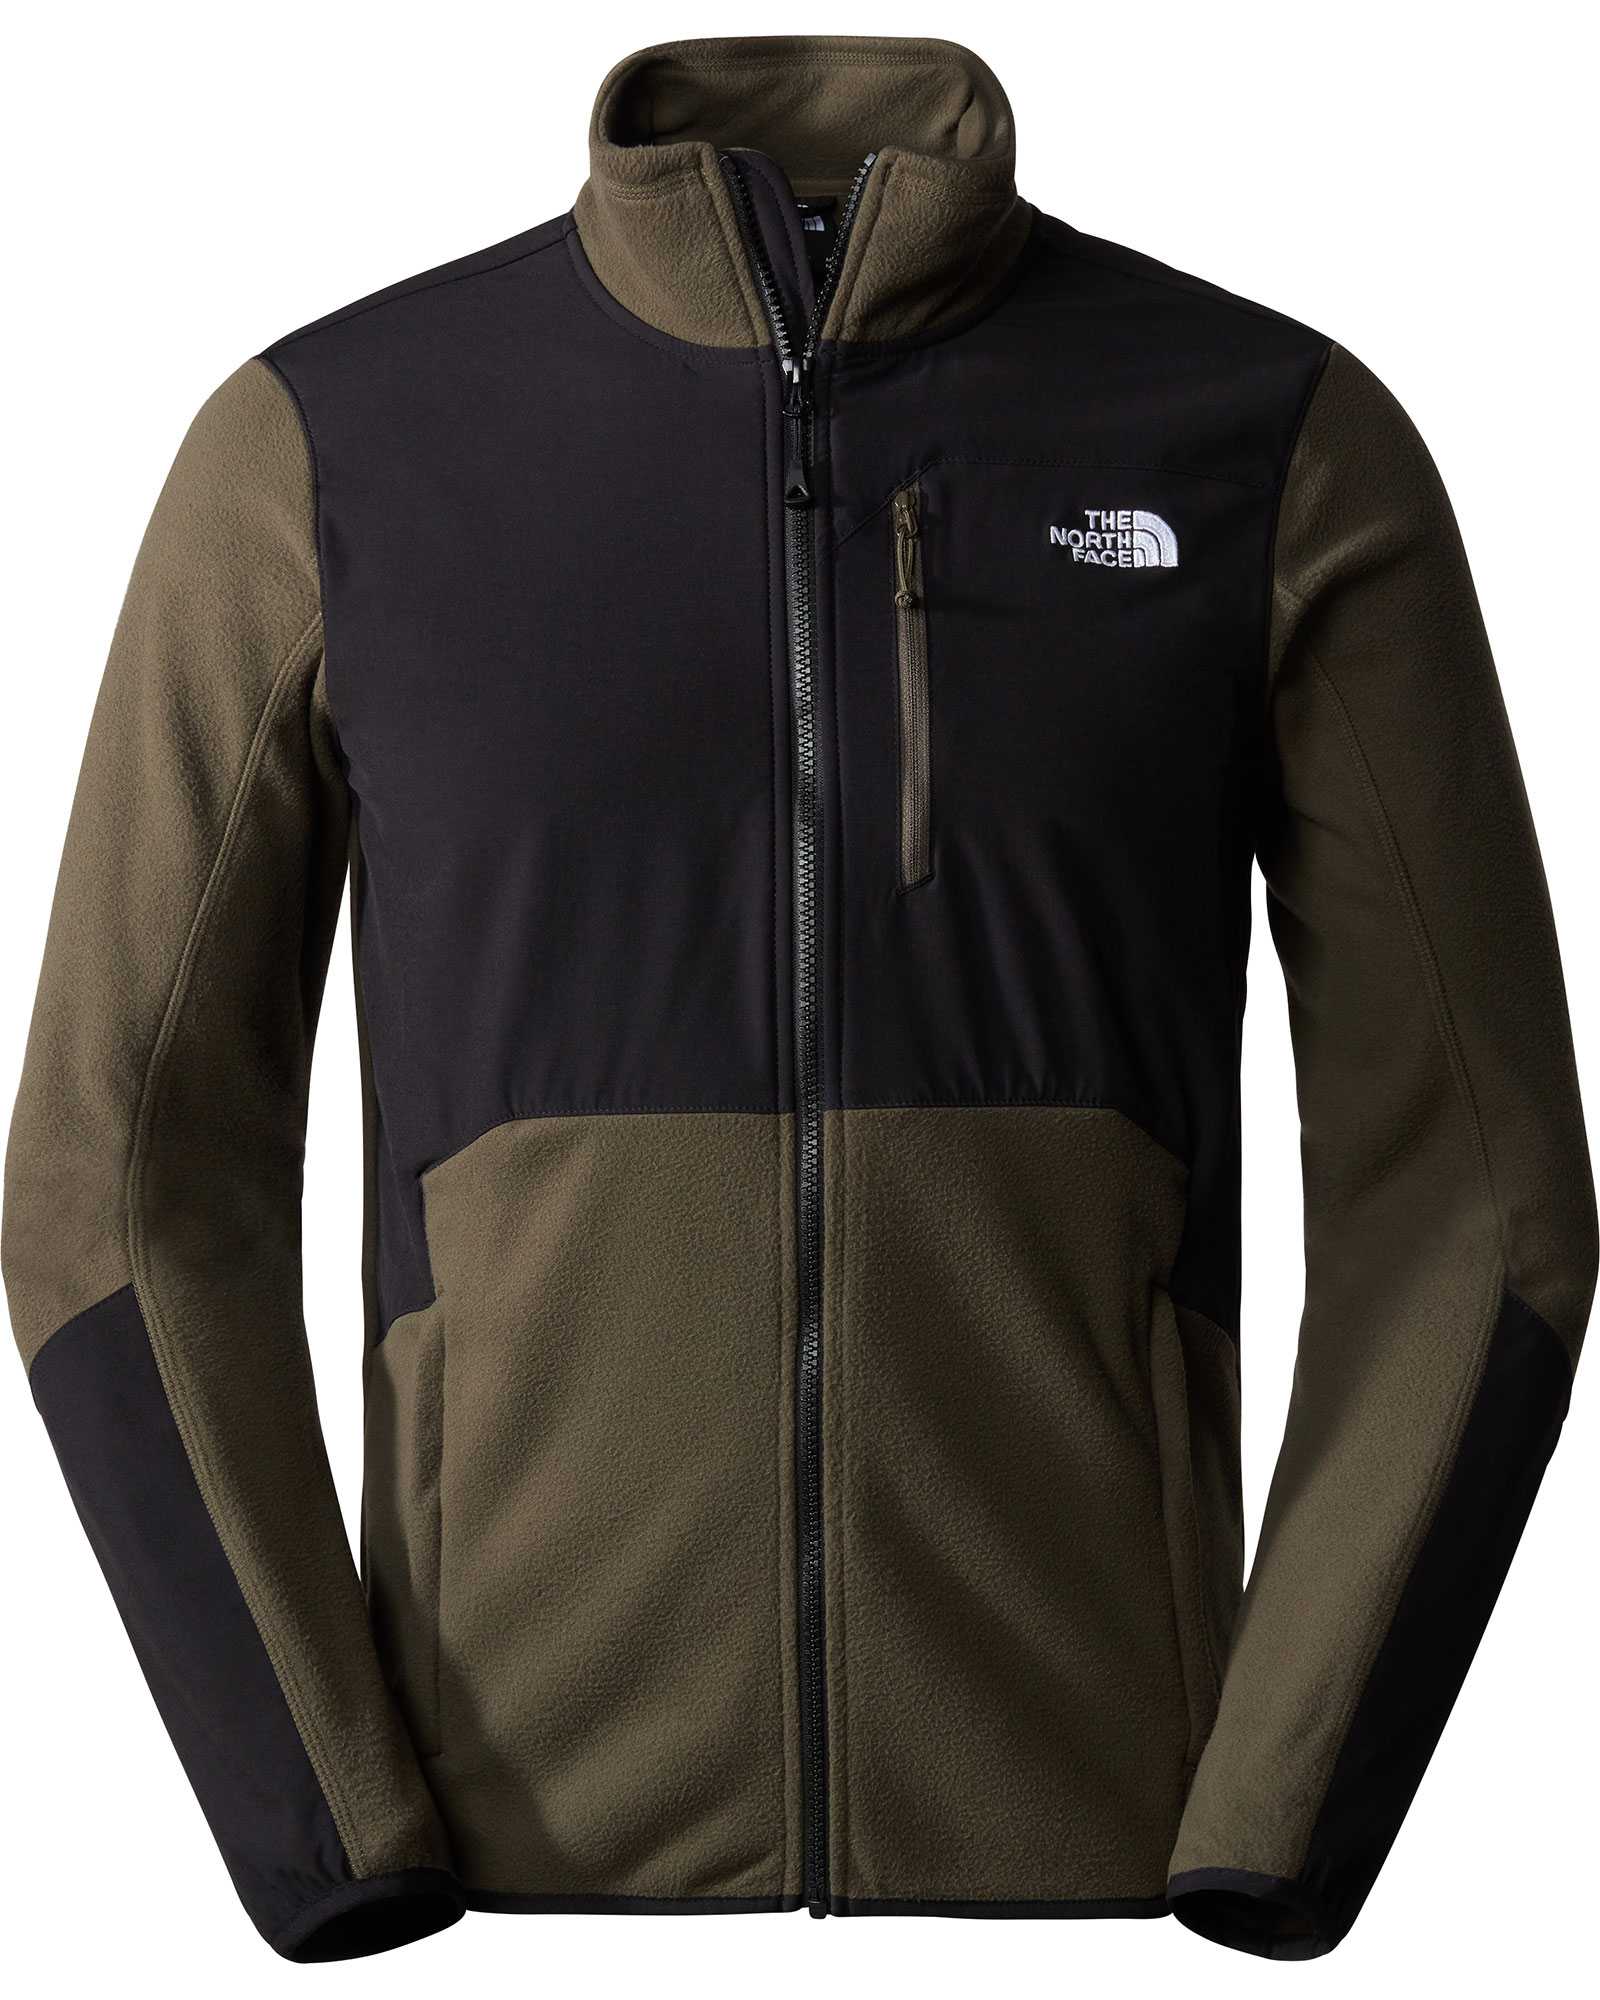 The North Face Glacier Pro Men’s Full Zip Jacket - New Taupe Green/TNF Black S